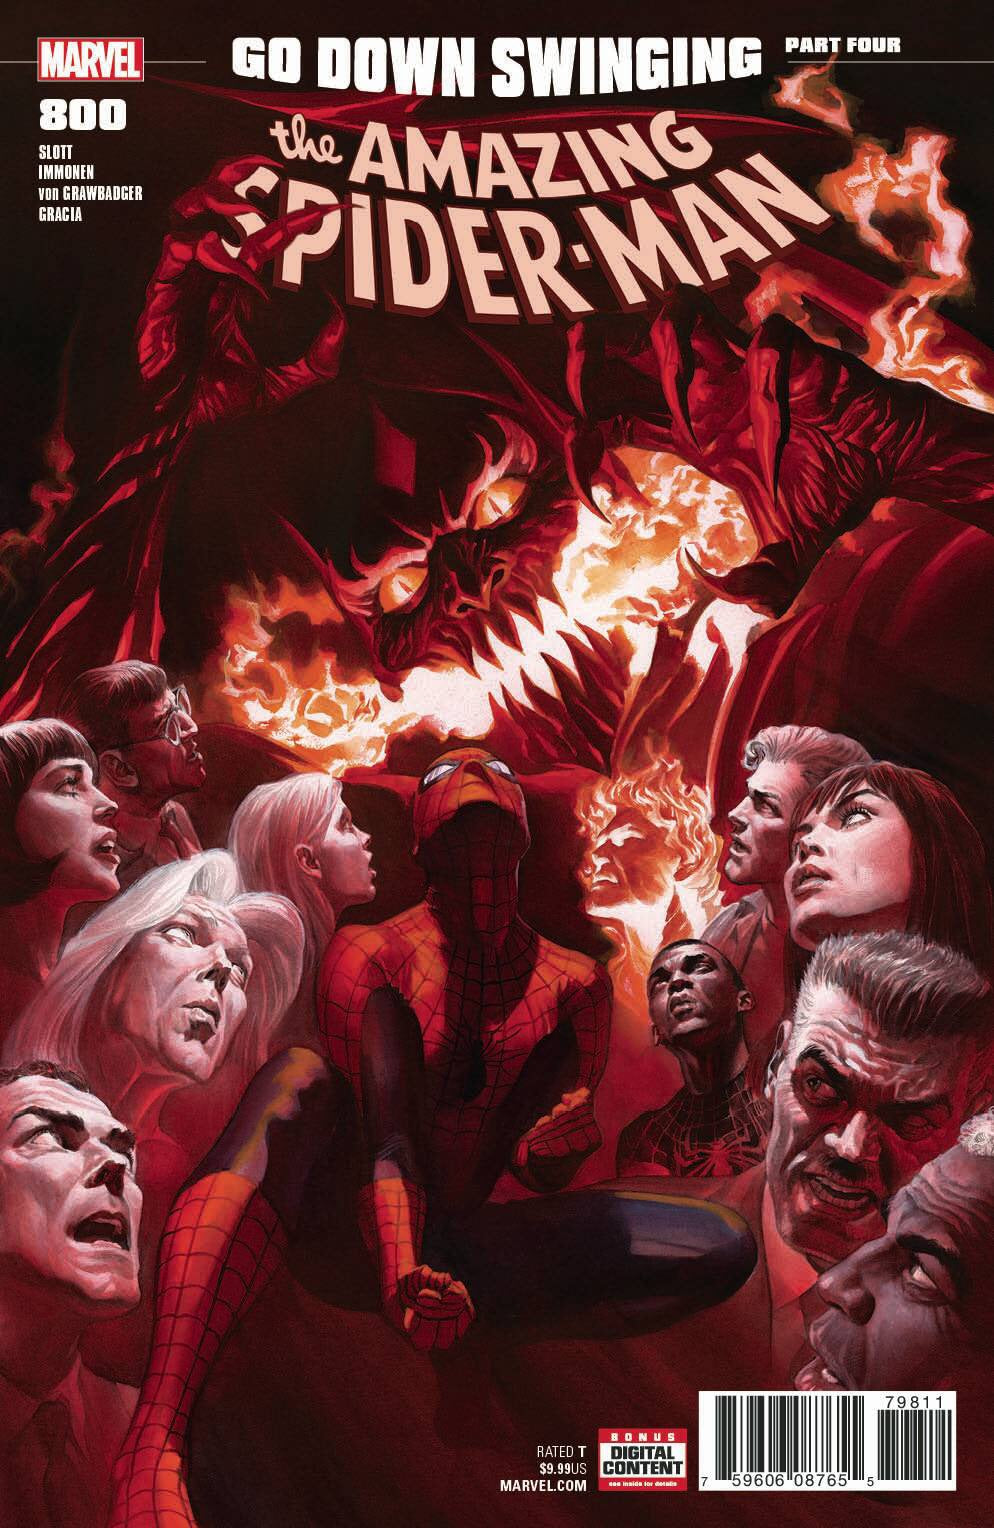 AMAZING SPIDER-MAN #800 LEG ALEX ROSS COVER RELEASE DATE 05/30